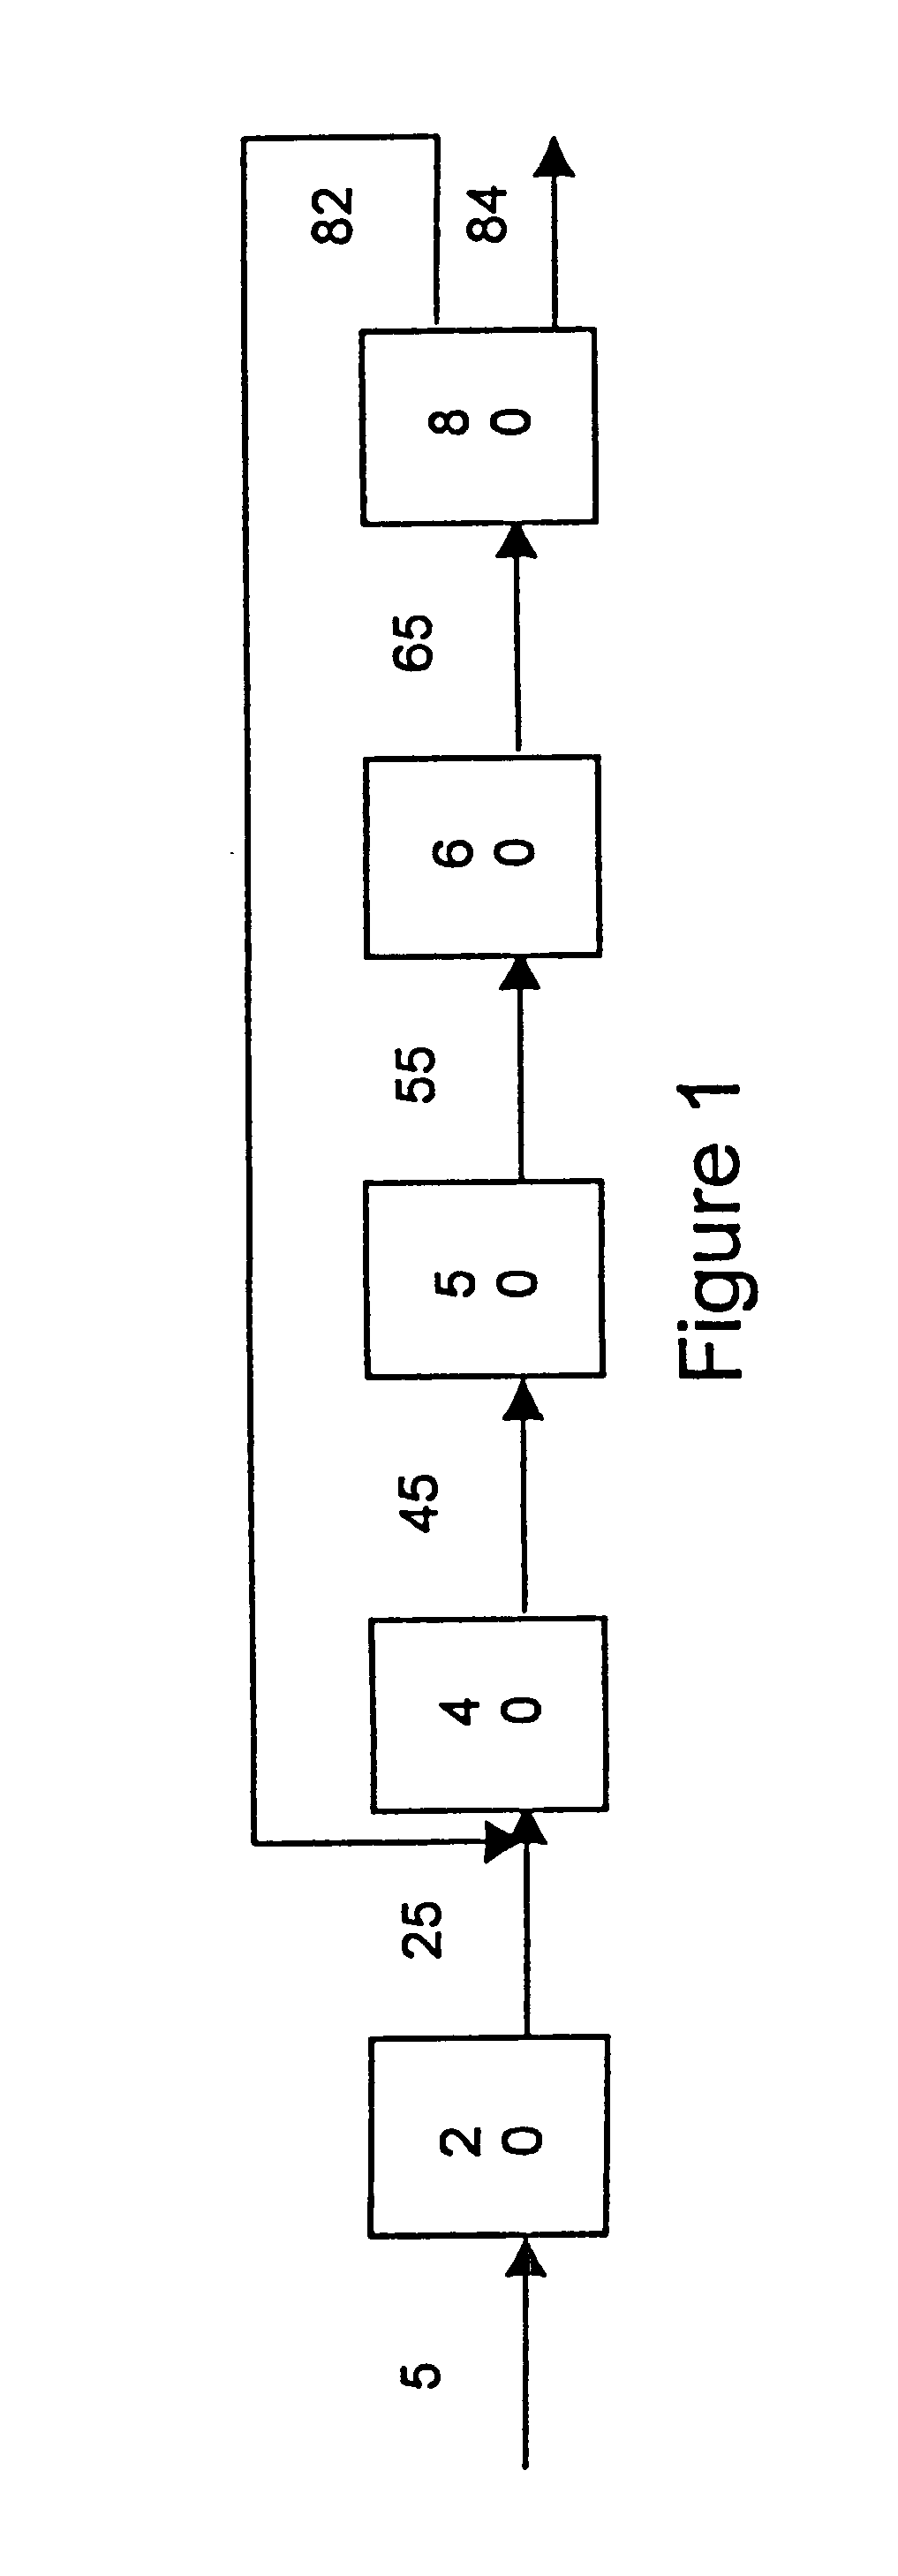 Process for making a lube base stock from a lower molecular weight feedstock